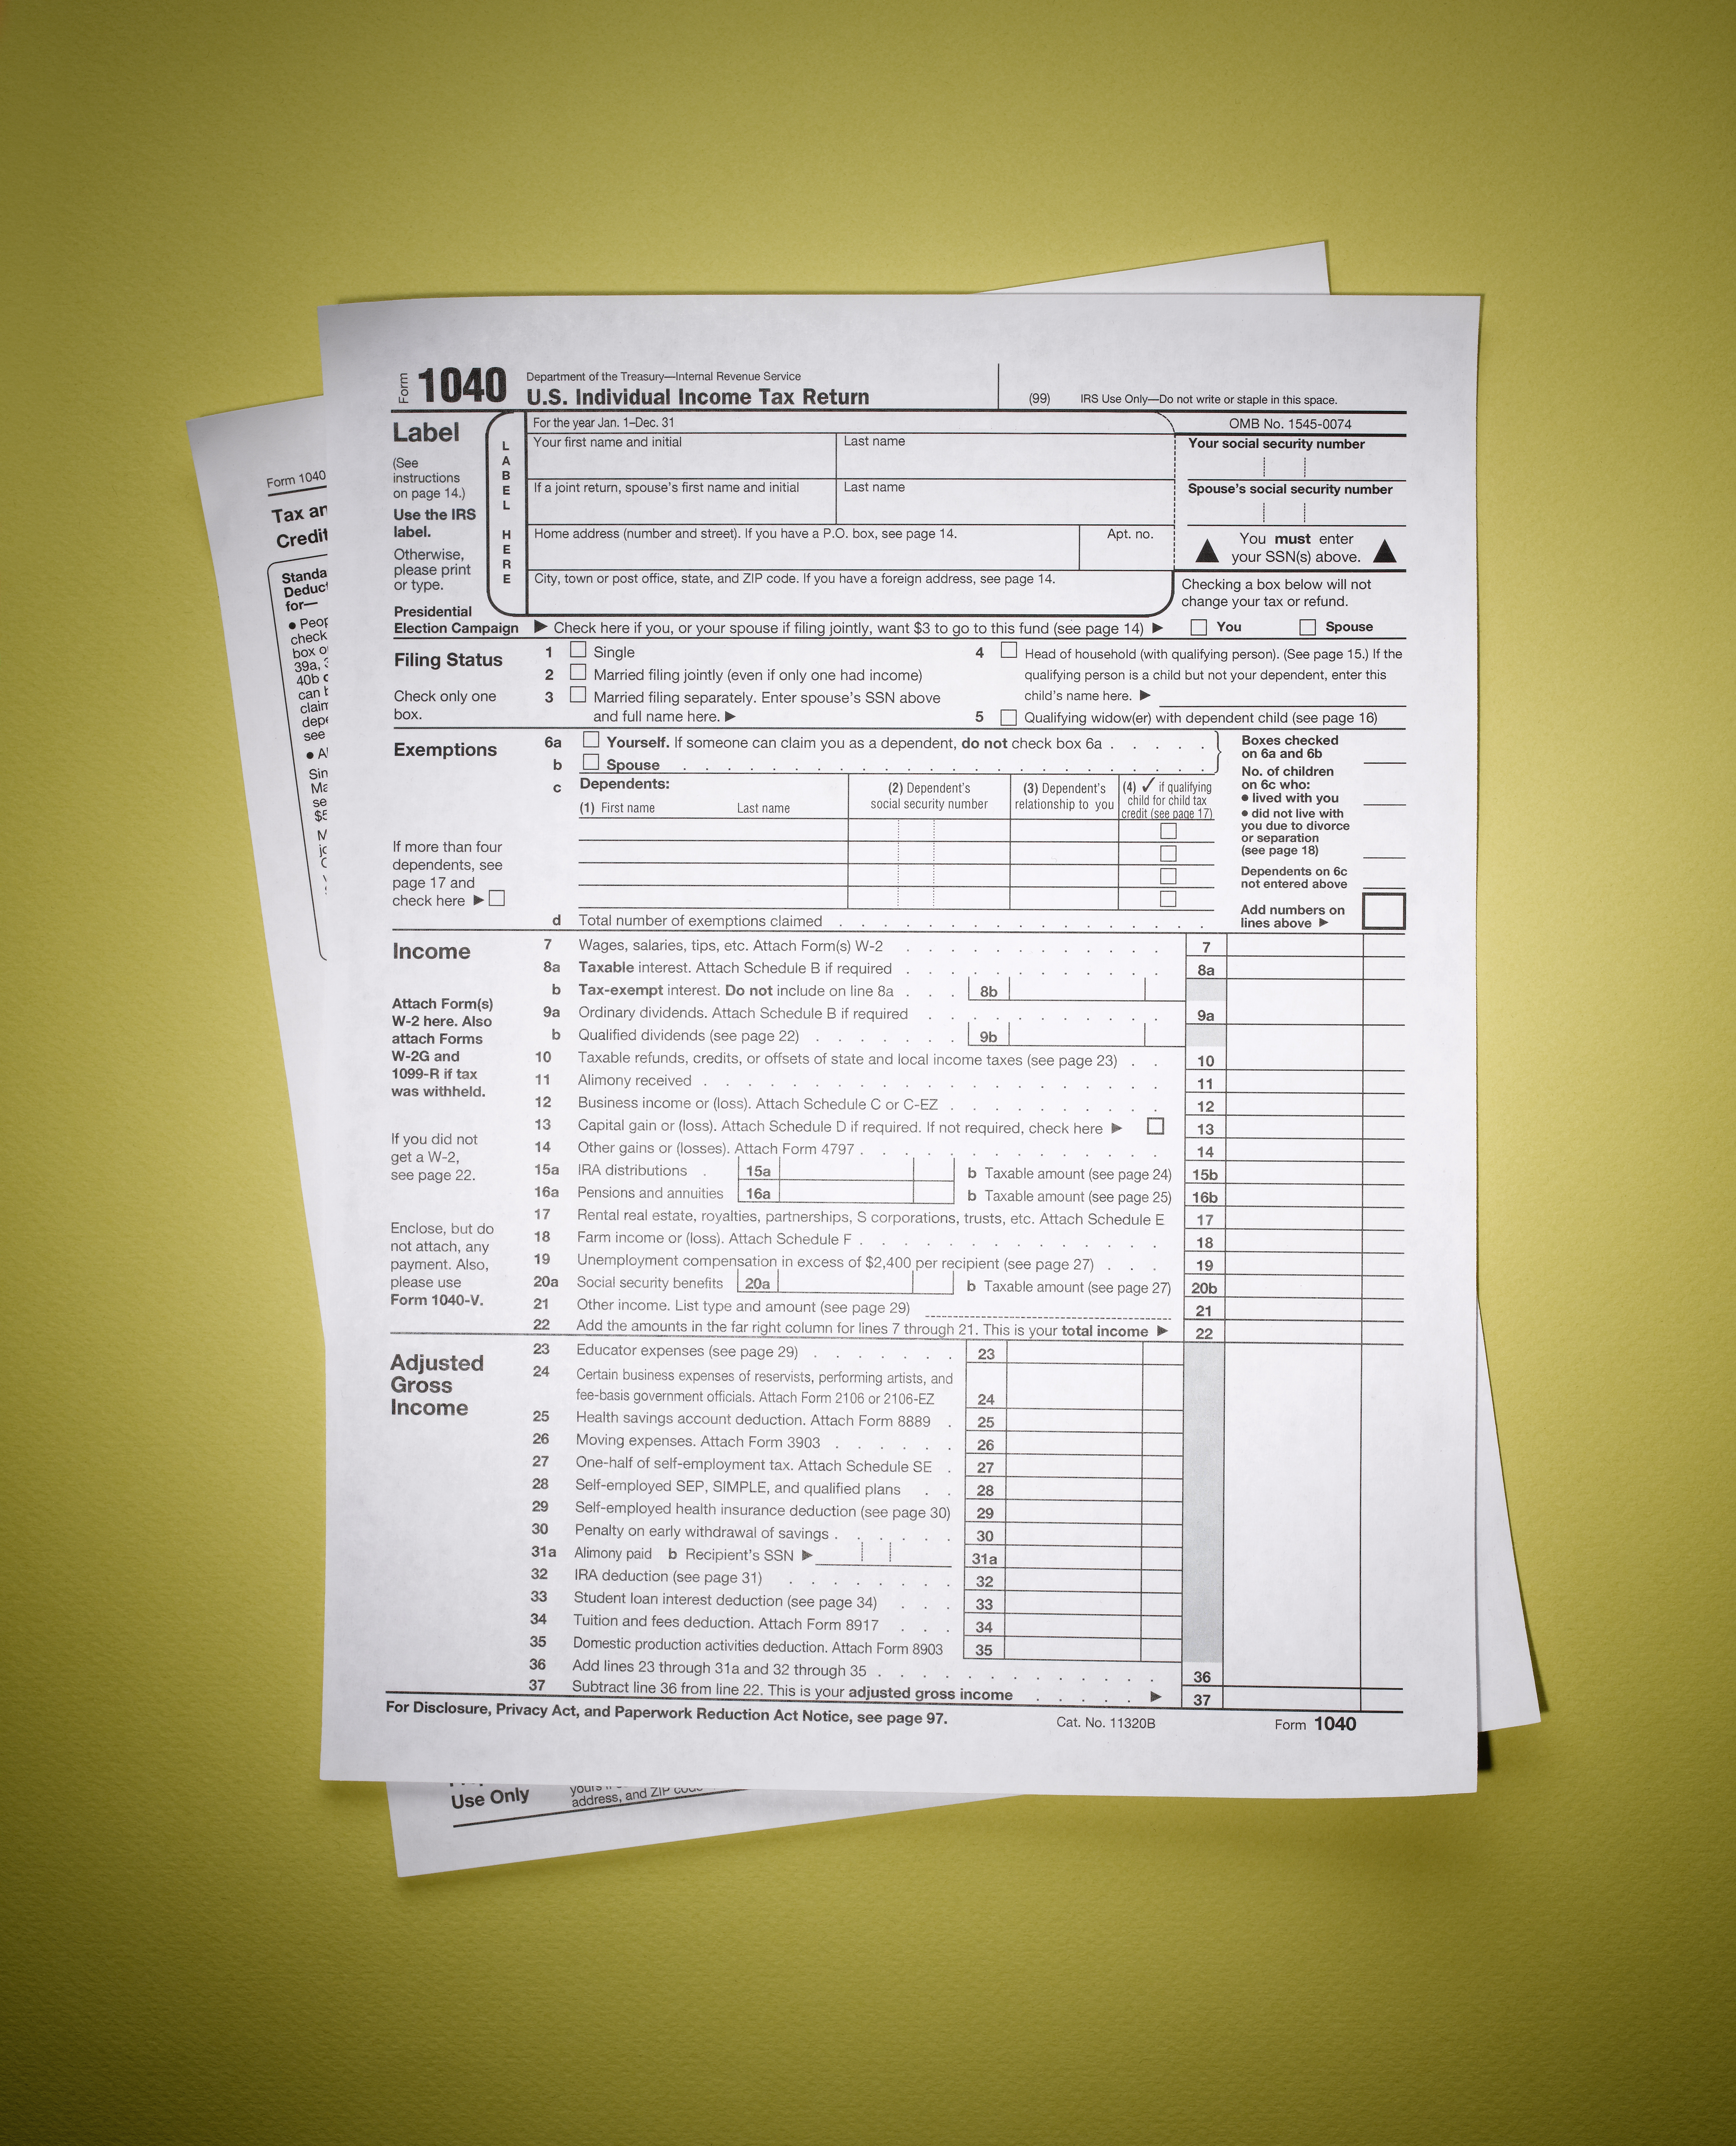 1040 Tax Forms (Getty Images)